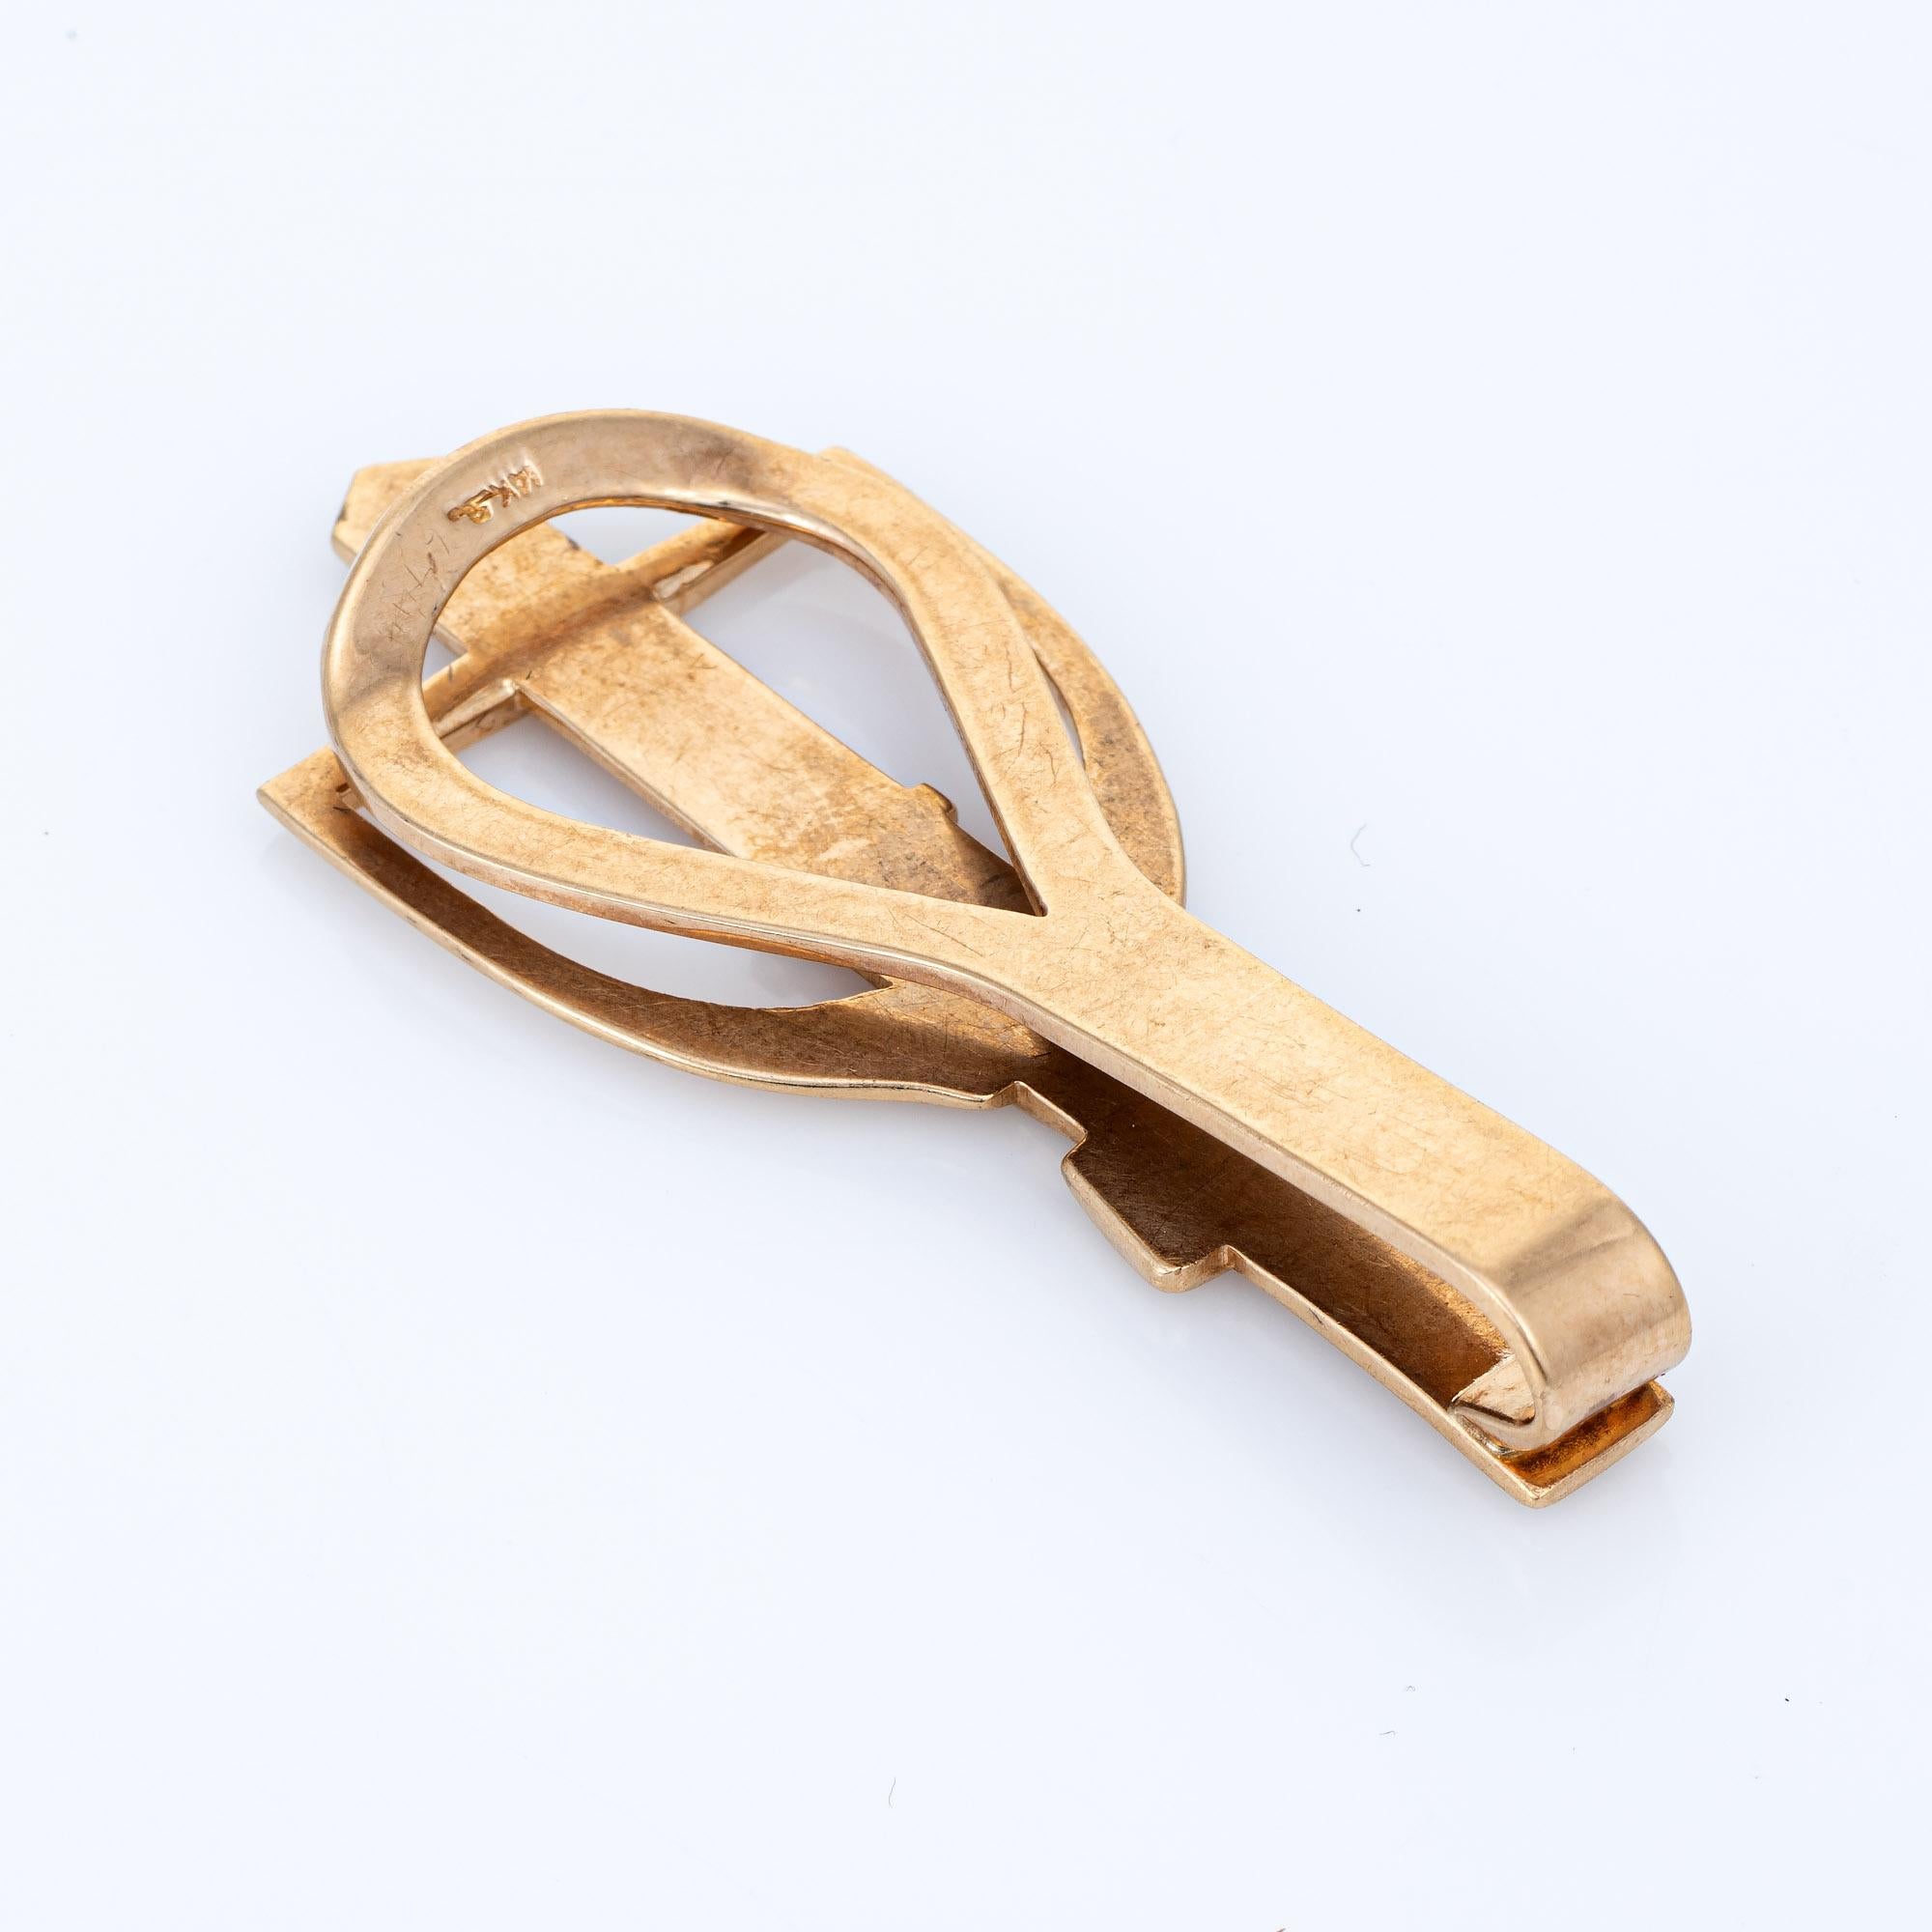 Stylish equestrian themed money clip crafted in 14k yellow gold (circa 1950s to 1960s). 

With a belt looped through the stirrup the horse themed dual-purpose money clip or tie bar is a unique piece for that hard-to-buy-for person in your life. It